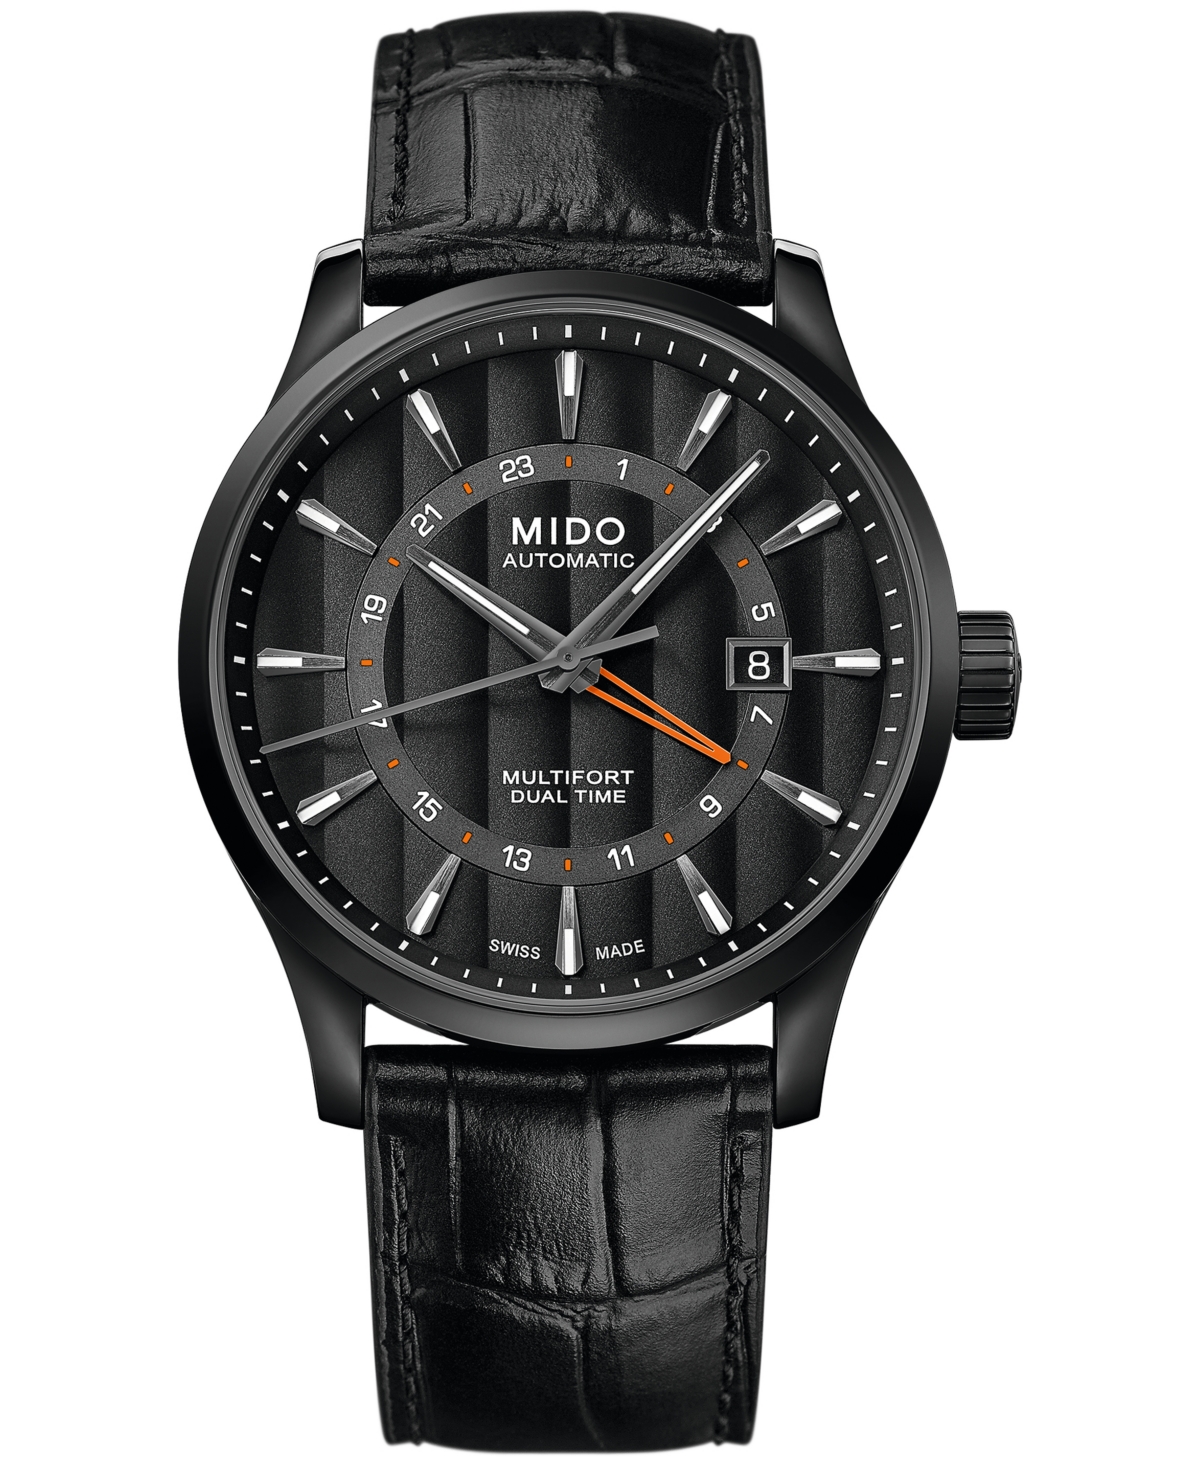 MIDO MEN'S SWISS AUTOMATIC MULTIFORT DUAL TIME BLACK LEATHER STRAP WATCH 42MM